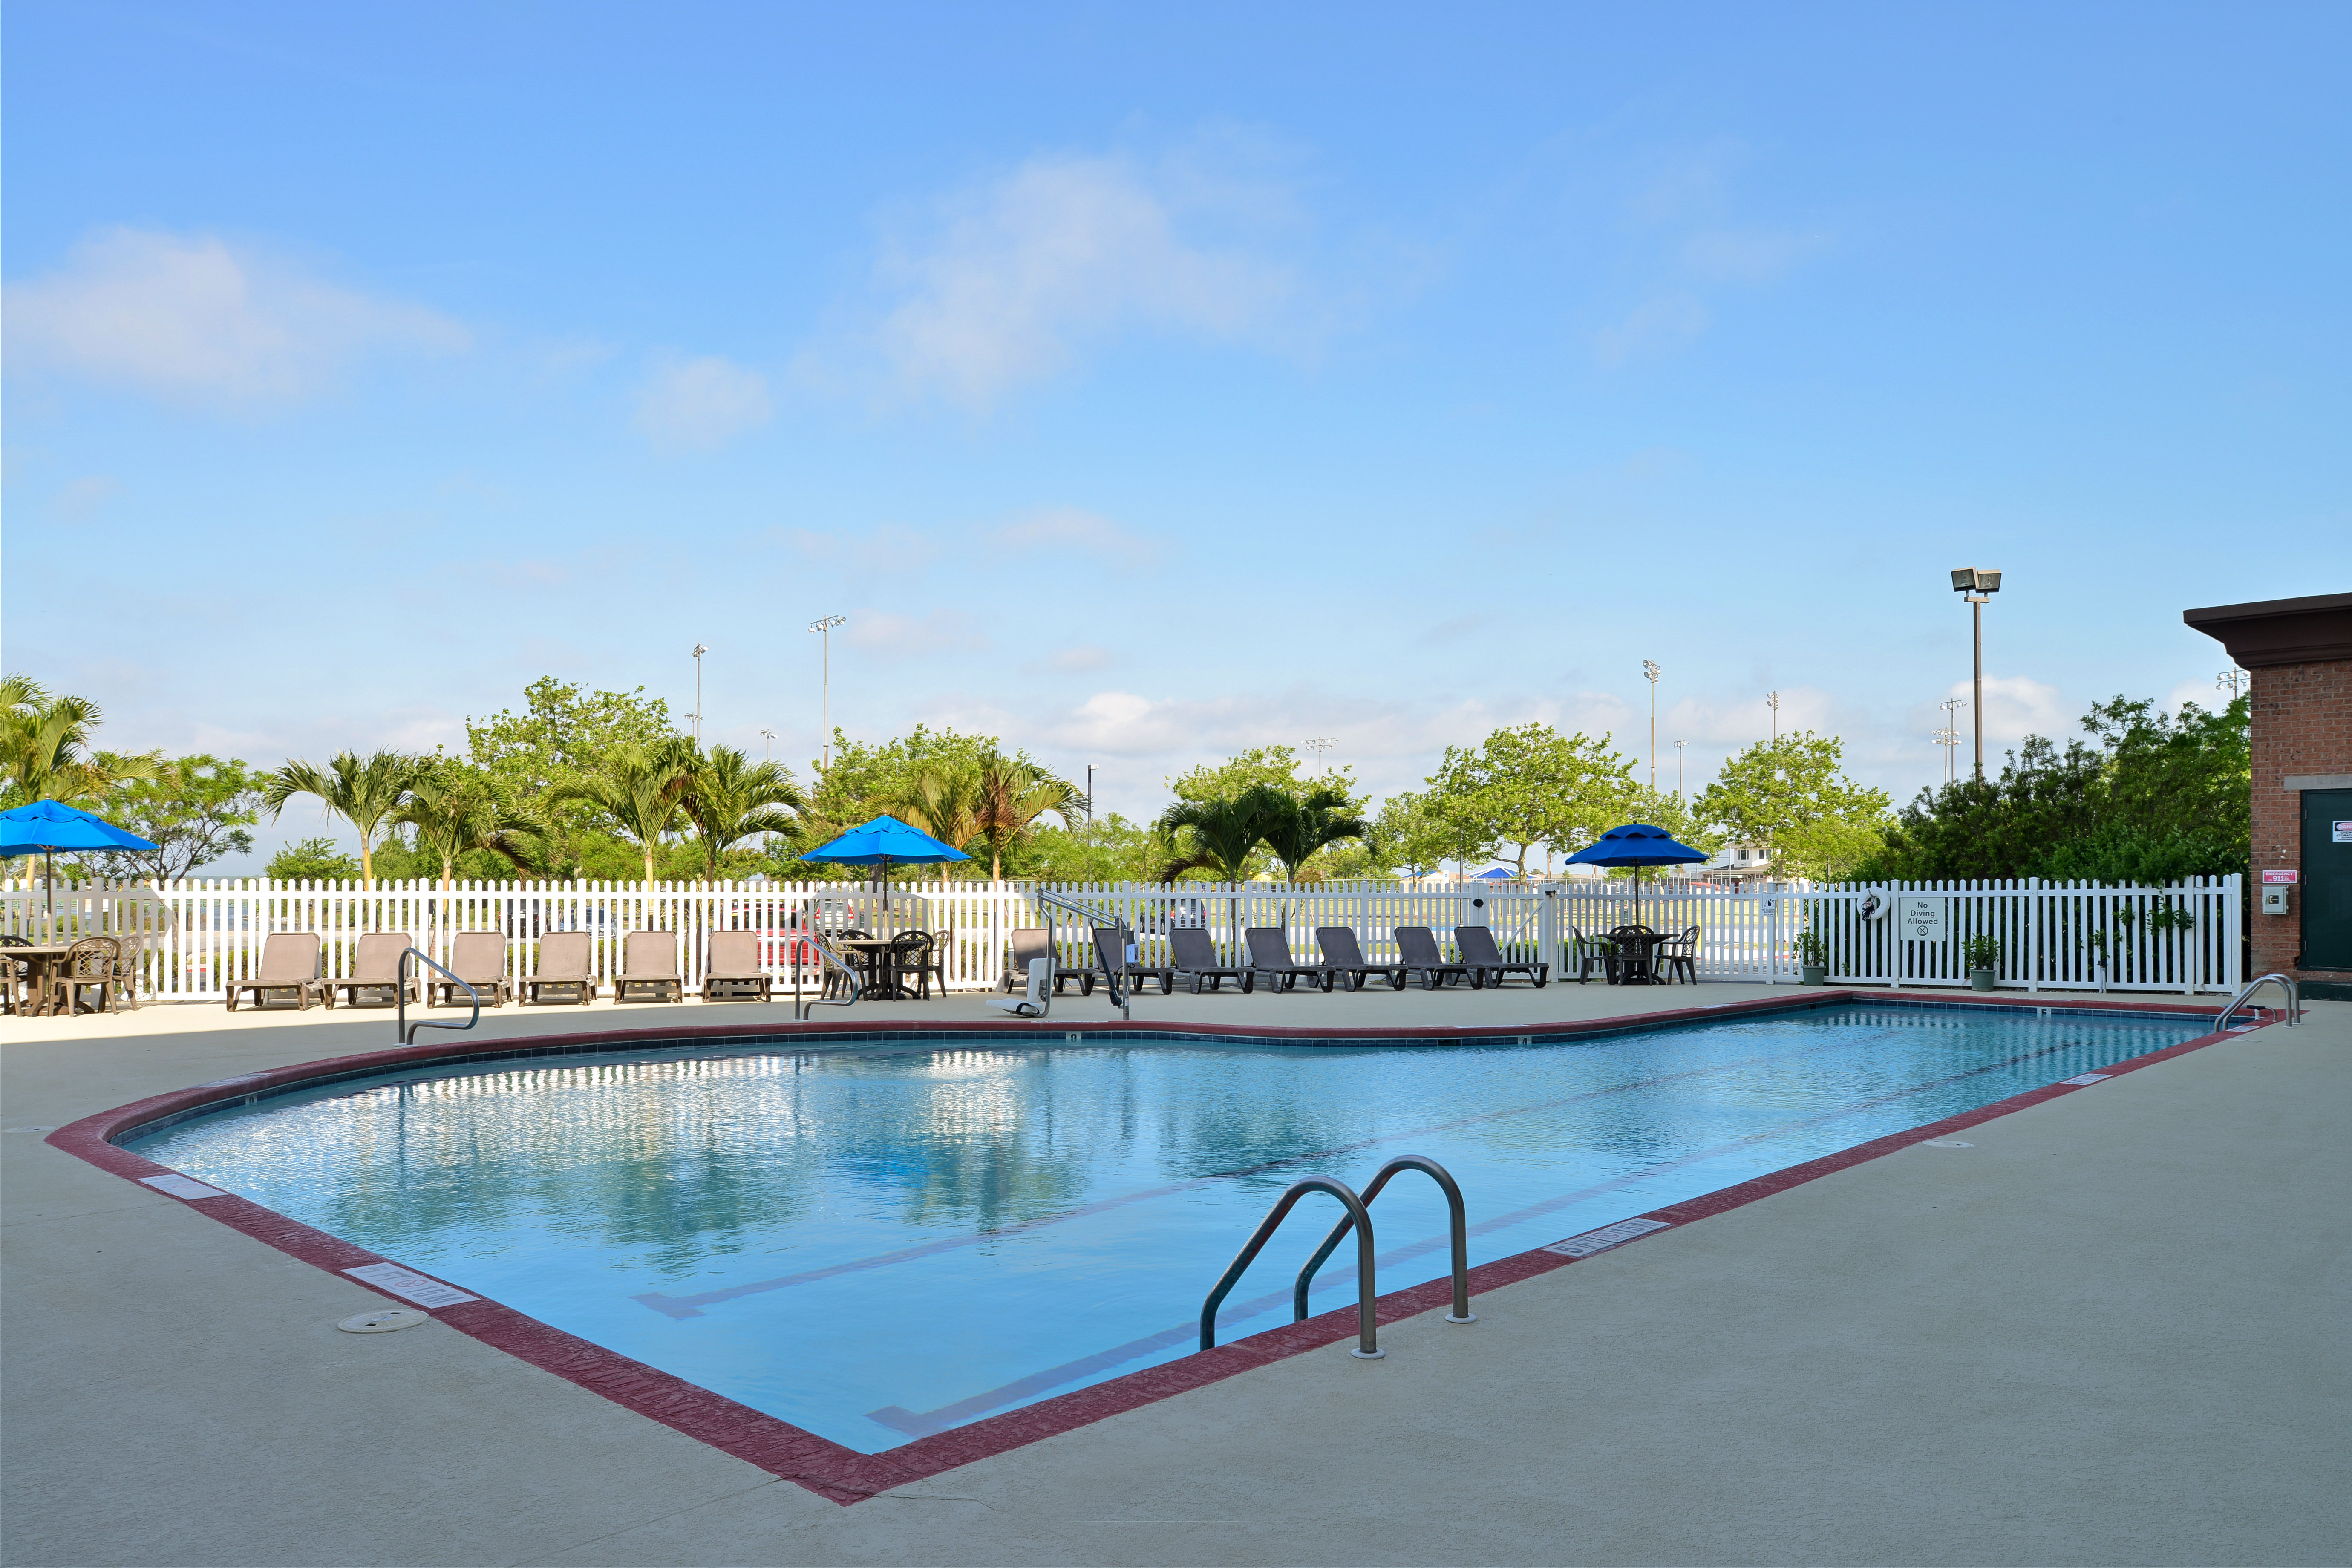 Enjoy the scenic view of Northside Park while relaxing at the pool